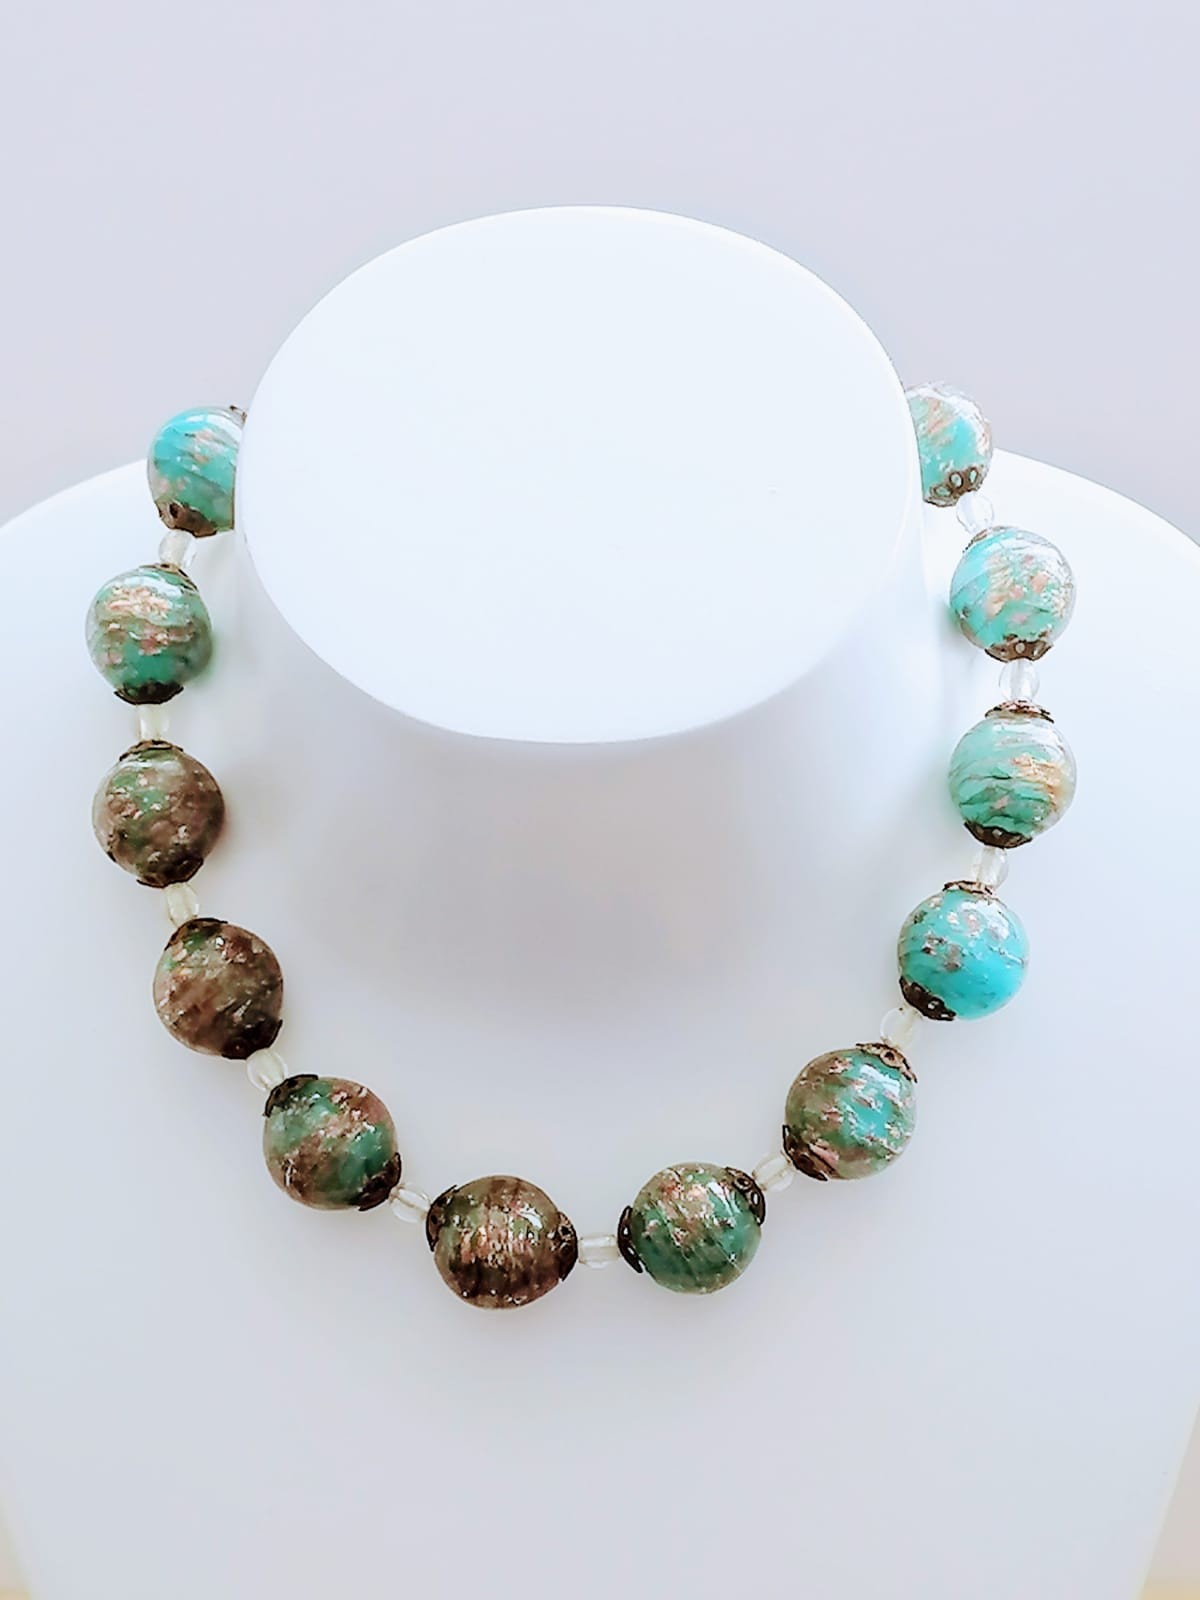 Rare Monart beaded necklace, turquoise with gold aventurine. 14 " (36cms) overall length.